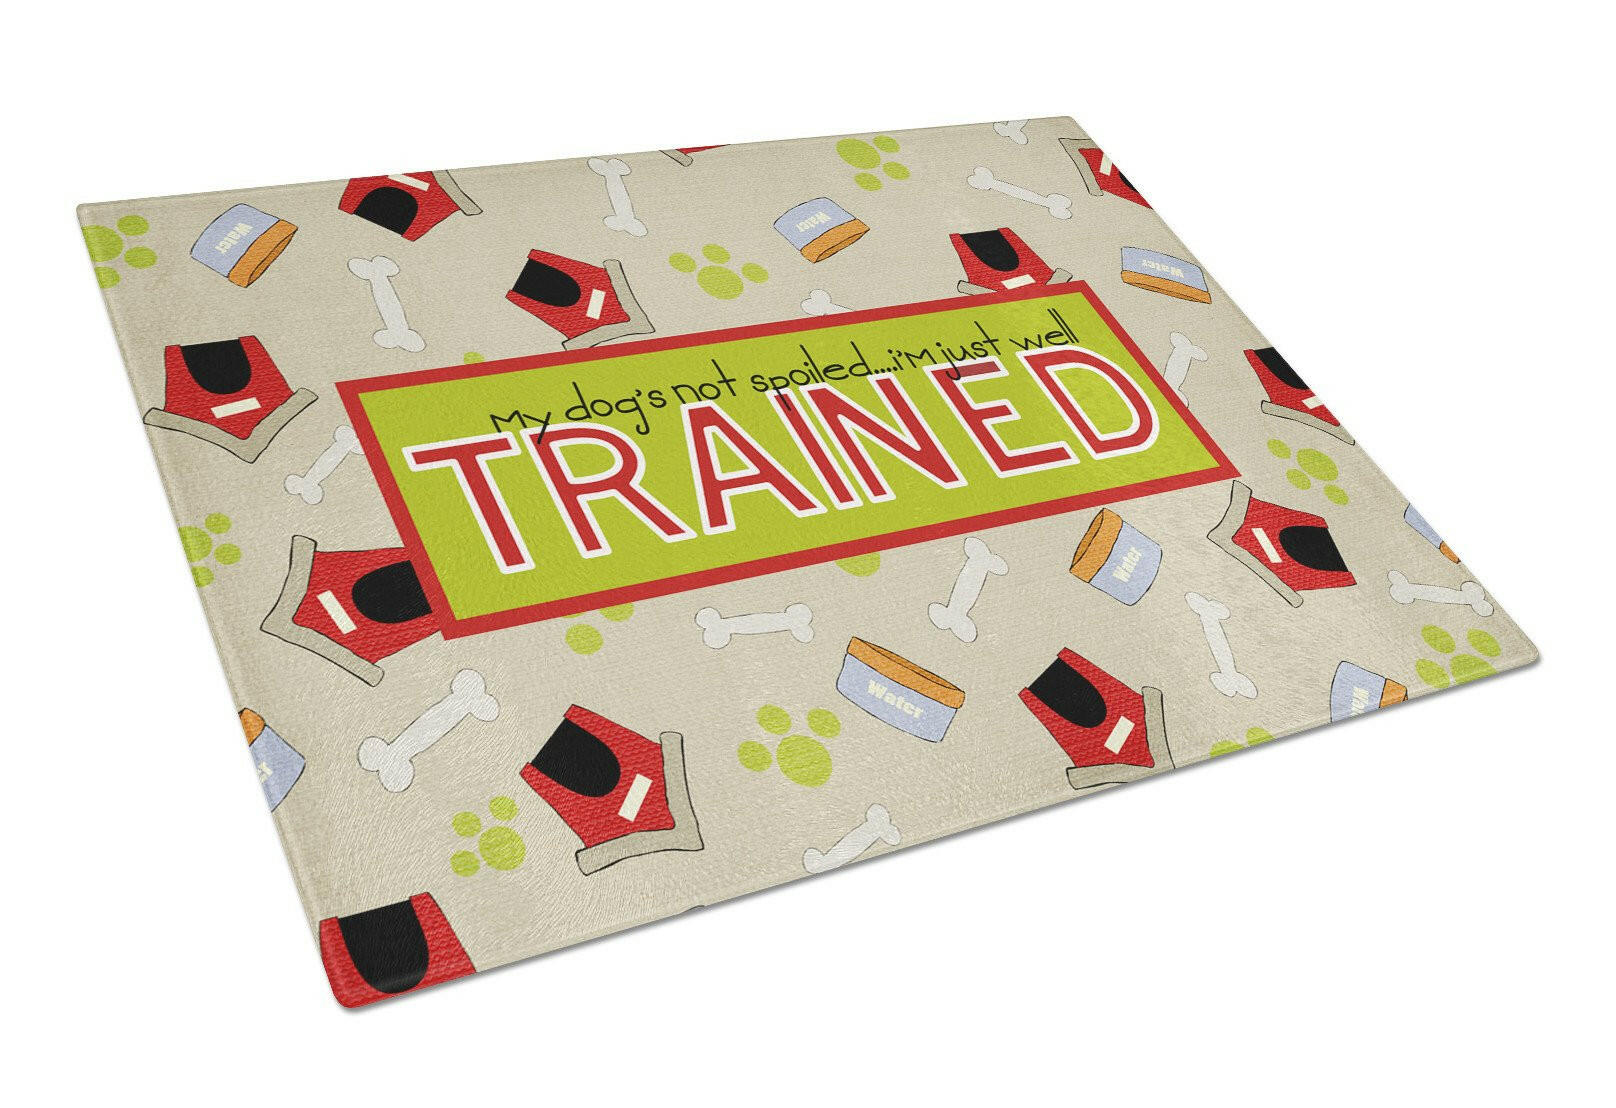 My Dog's not spoiled I'm just well trained Glass Cutting Board Large Size SB3051LCB by Caroline's Treasures